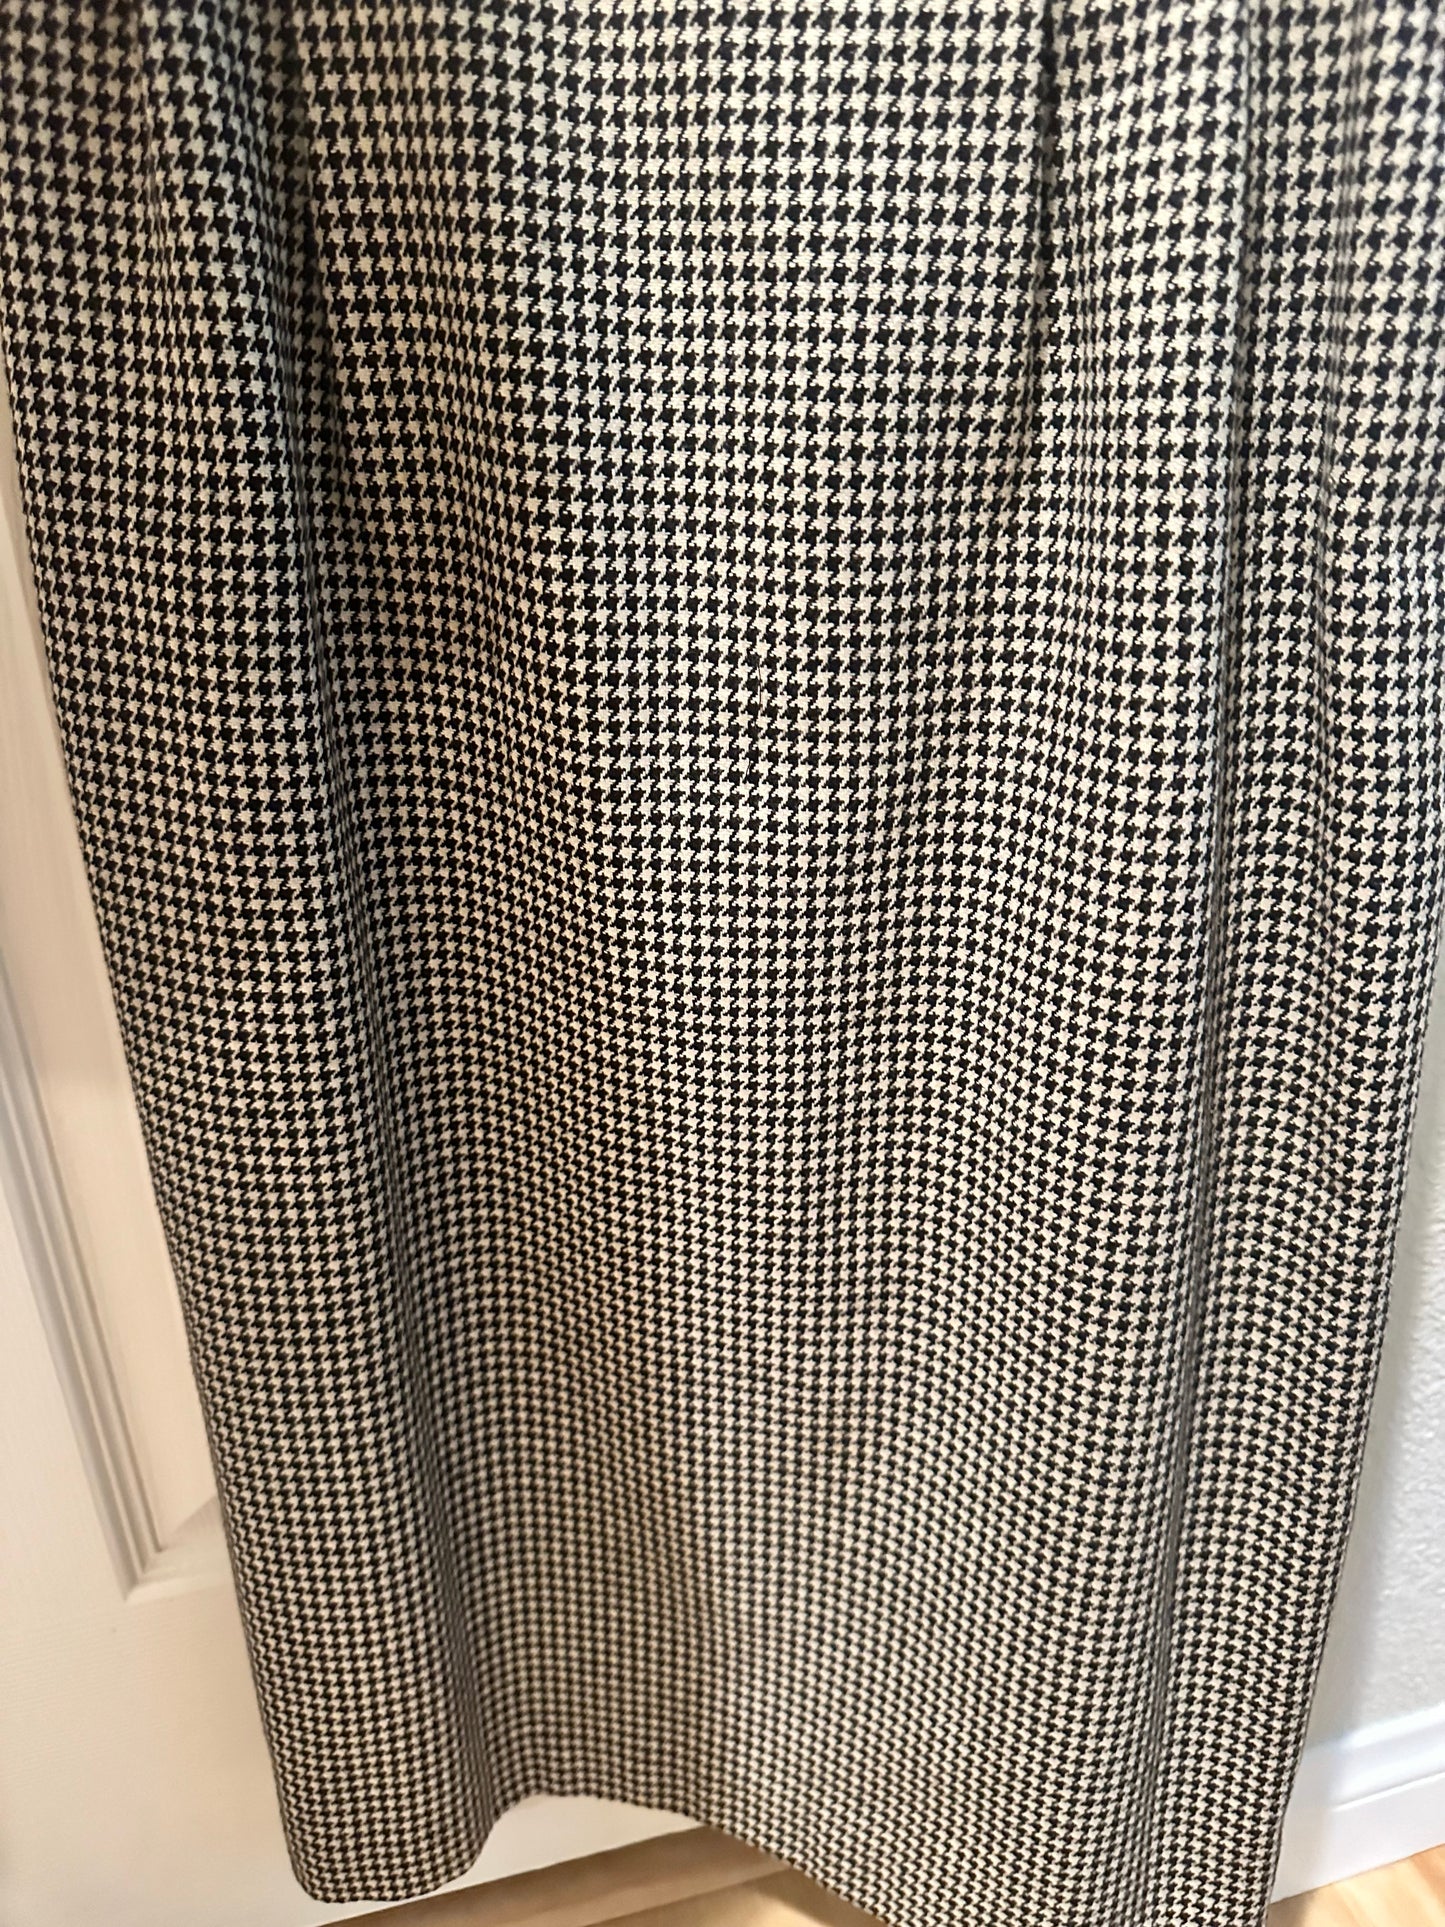 Two-Piece Houndstooth Print Kasper for ASL Jacket and Skirt, US Size 6